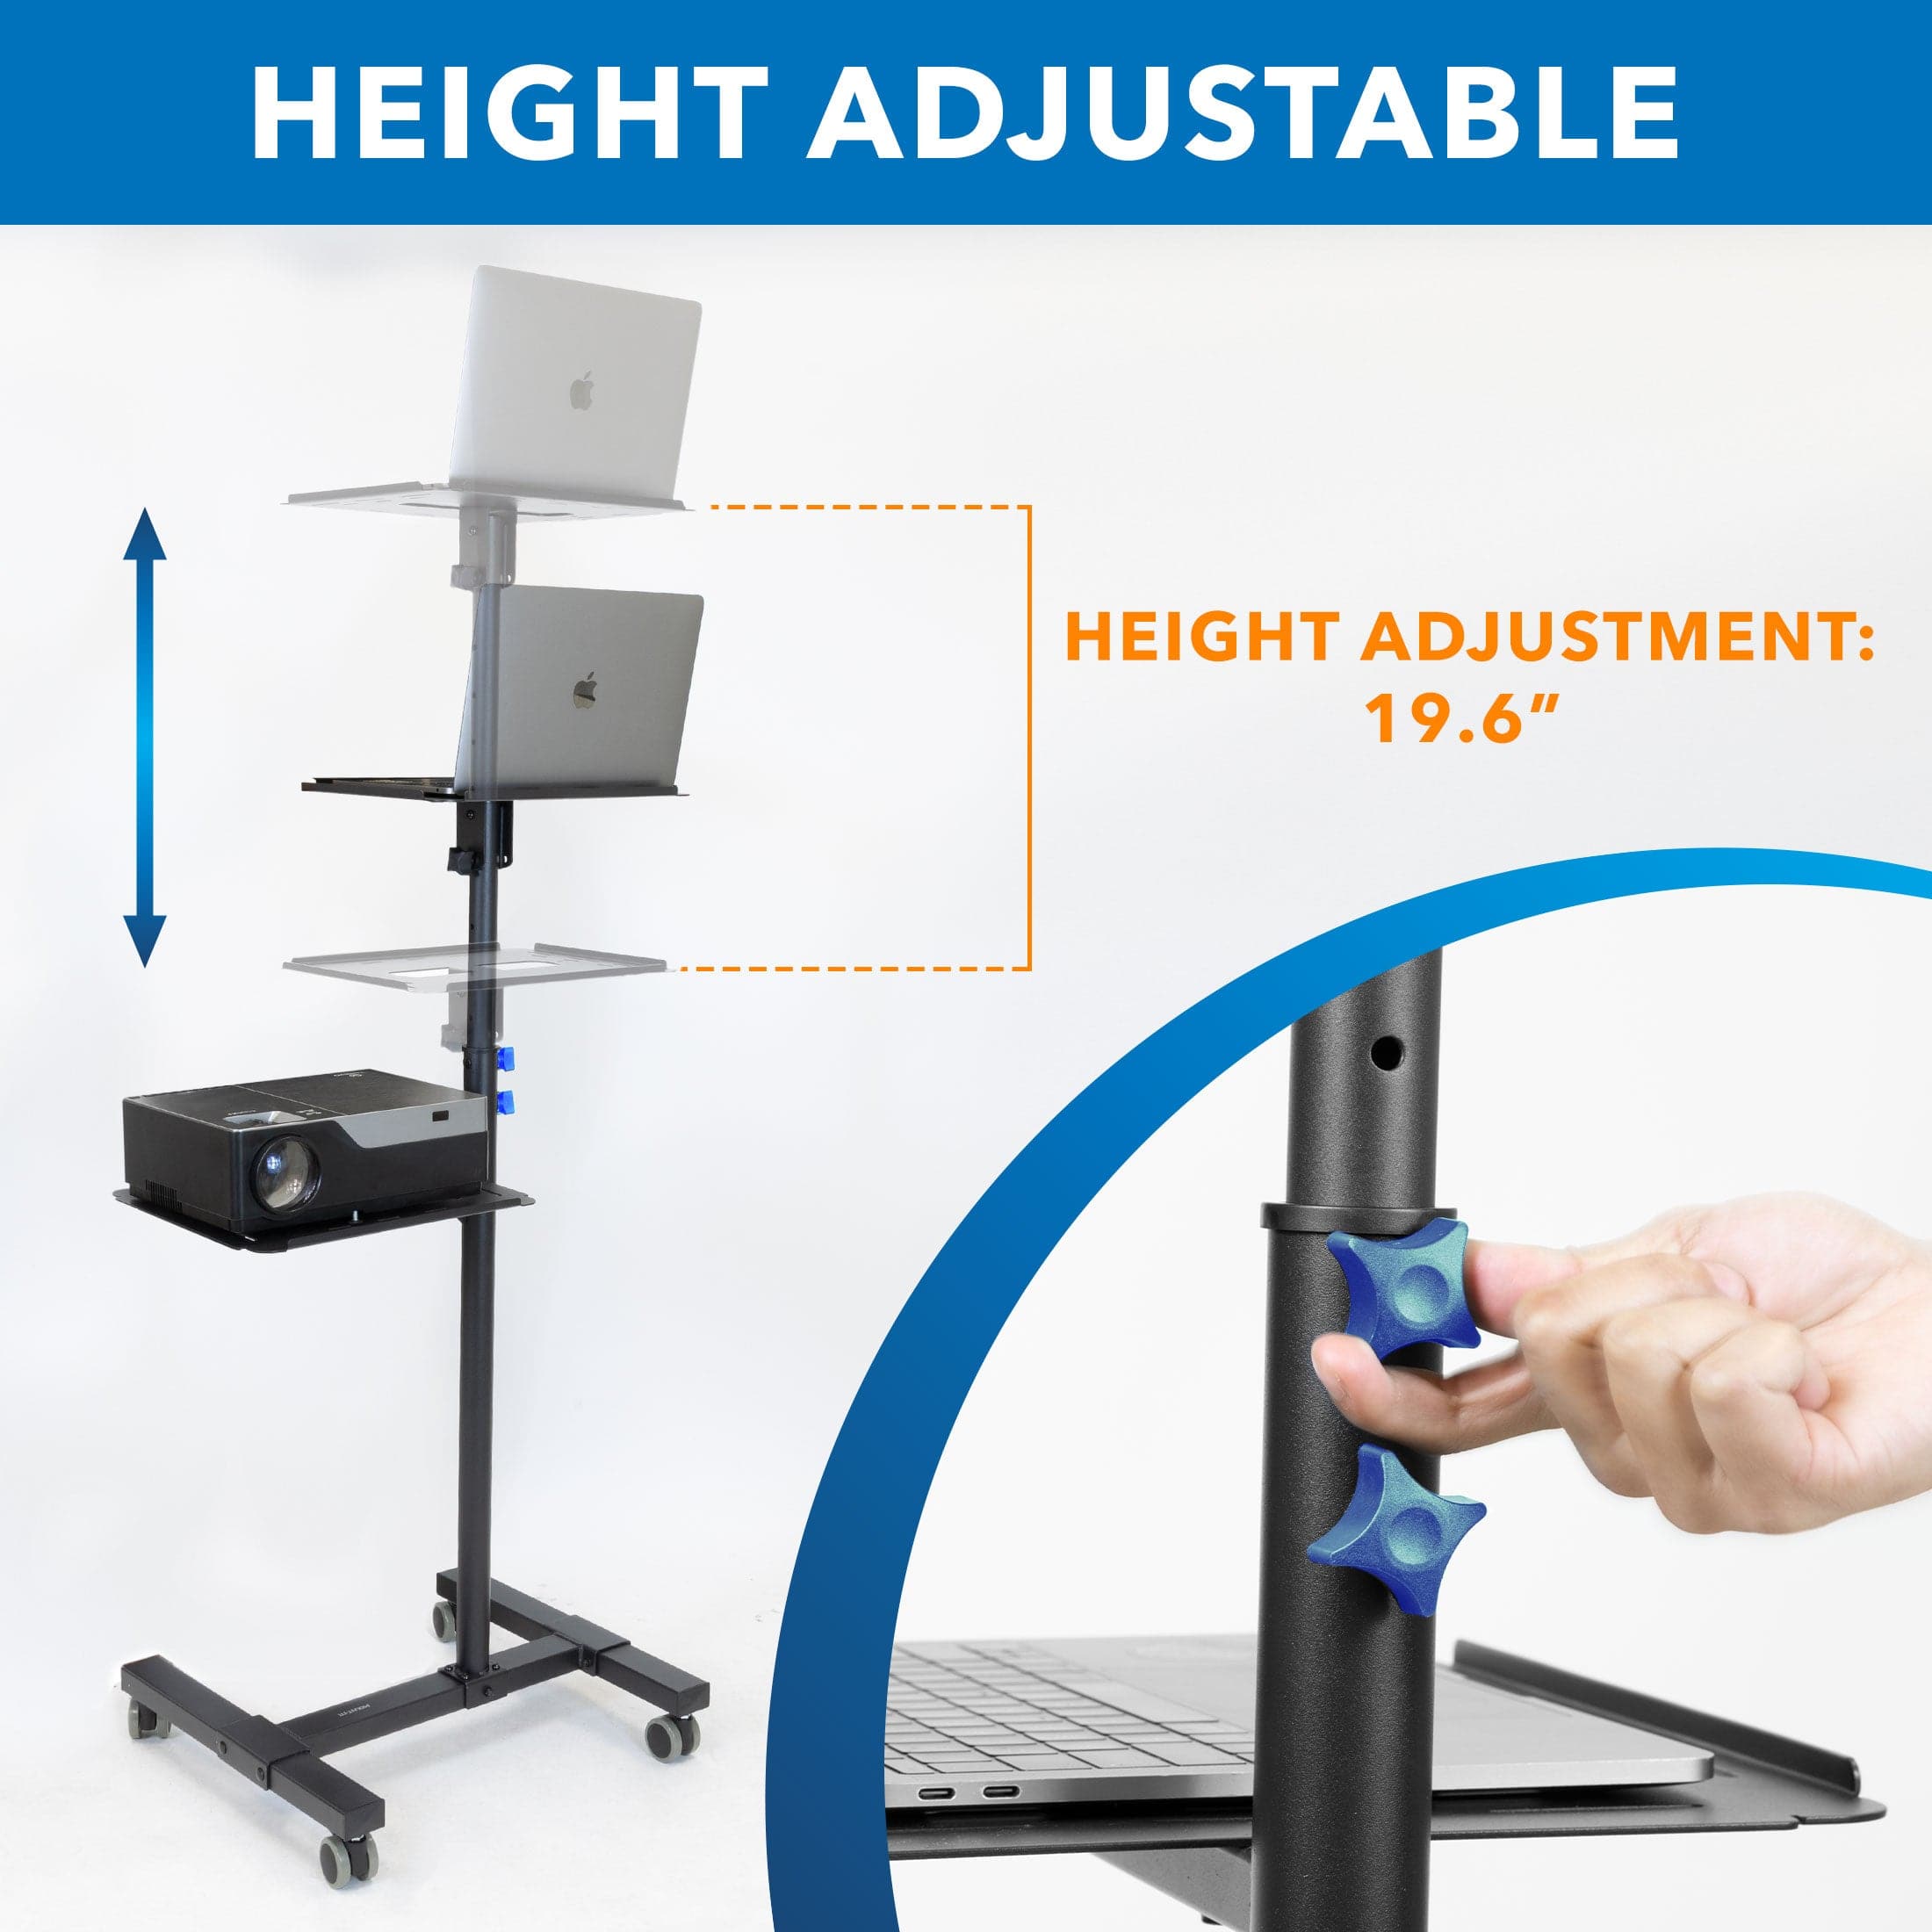 Portable Height Adjustable Laptop & Projector Stand